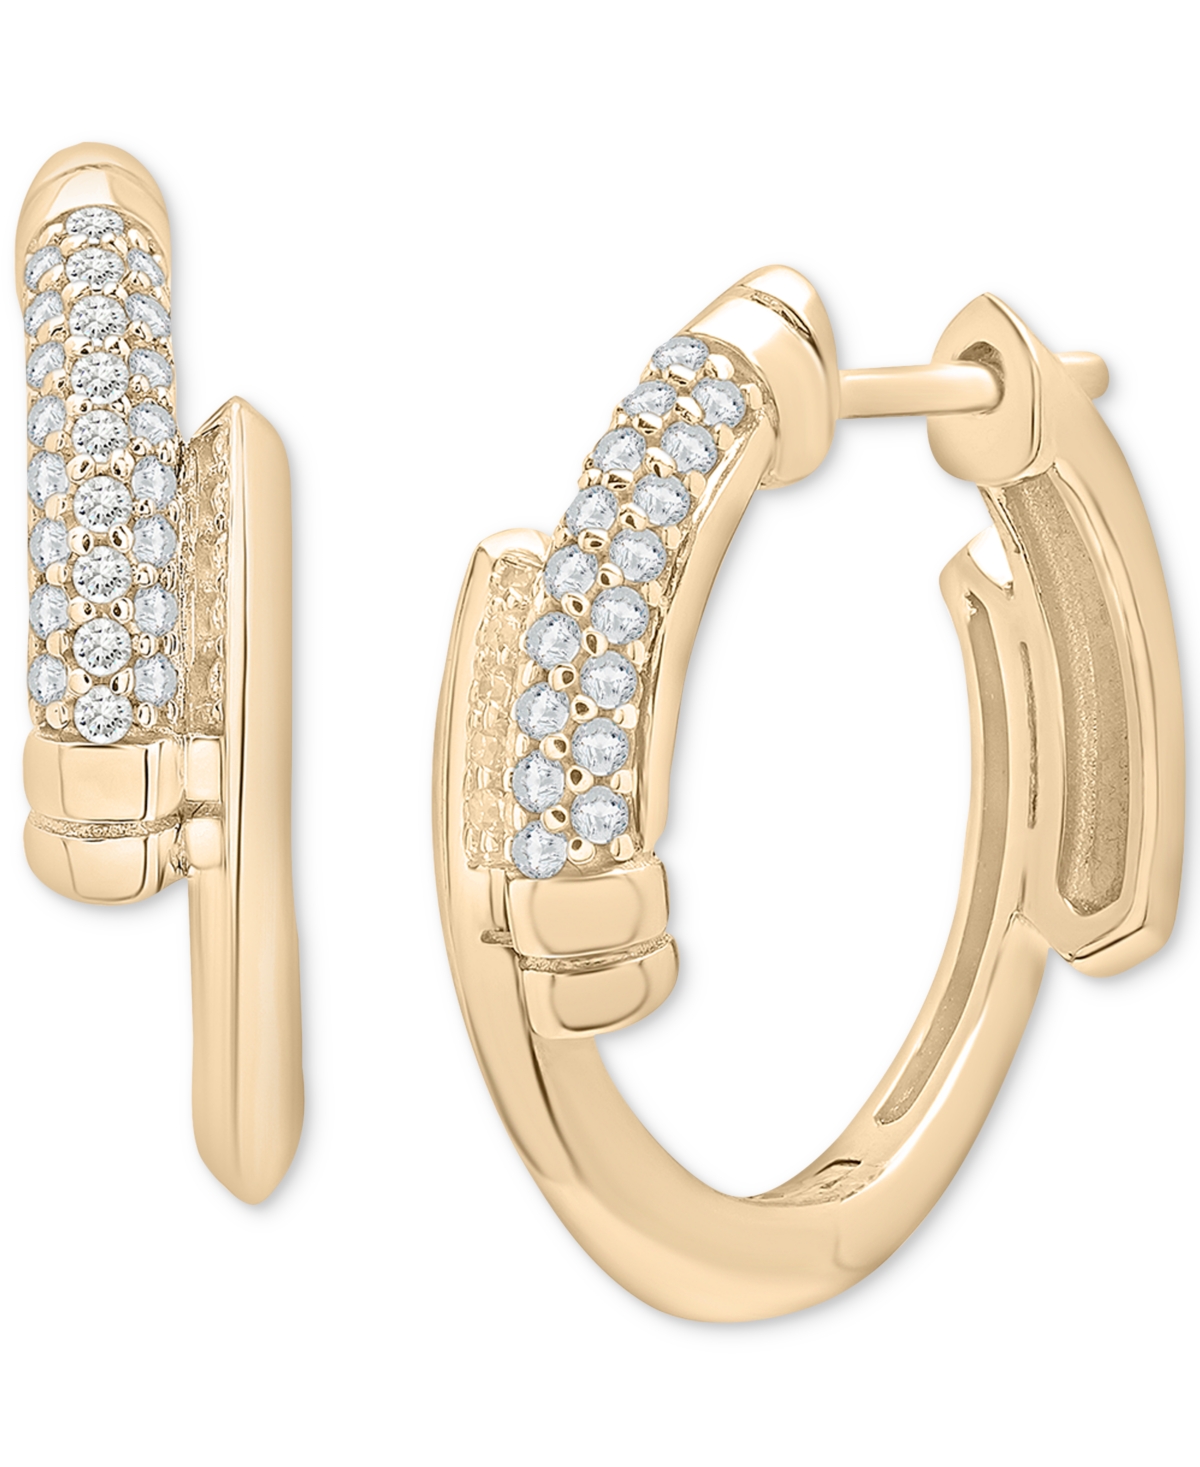 Audrey By Aurate Diamond Small Hoop Earrings (1/6 Ct. T.w.) In Gold Vermeil, Created For Macy's